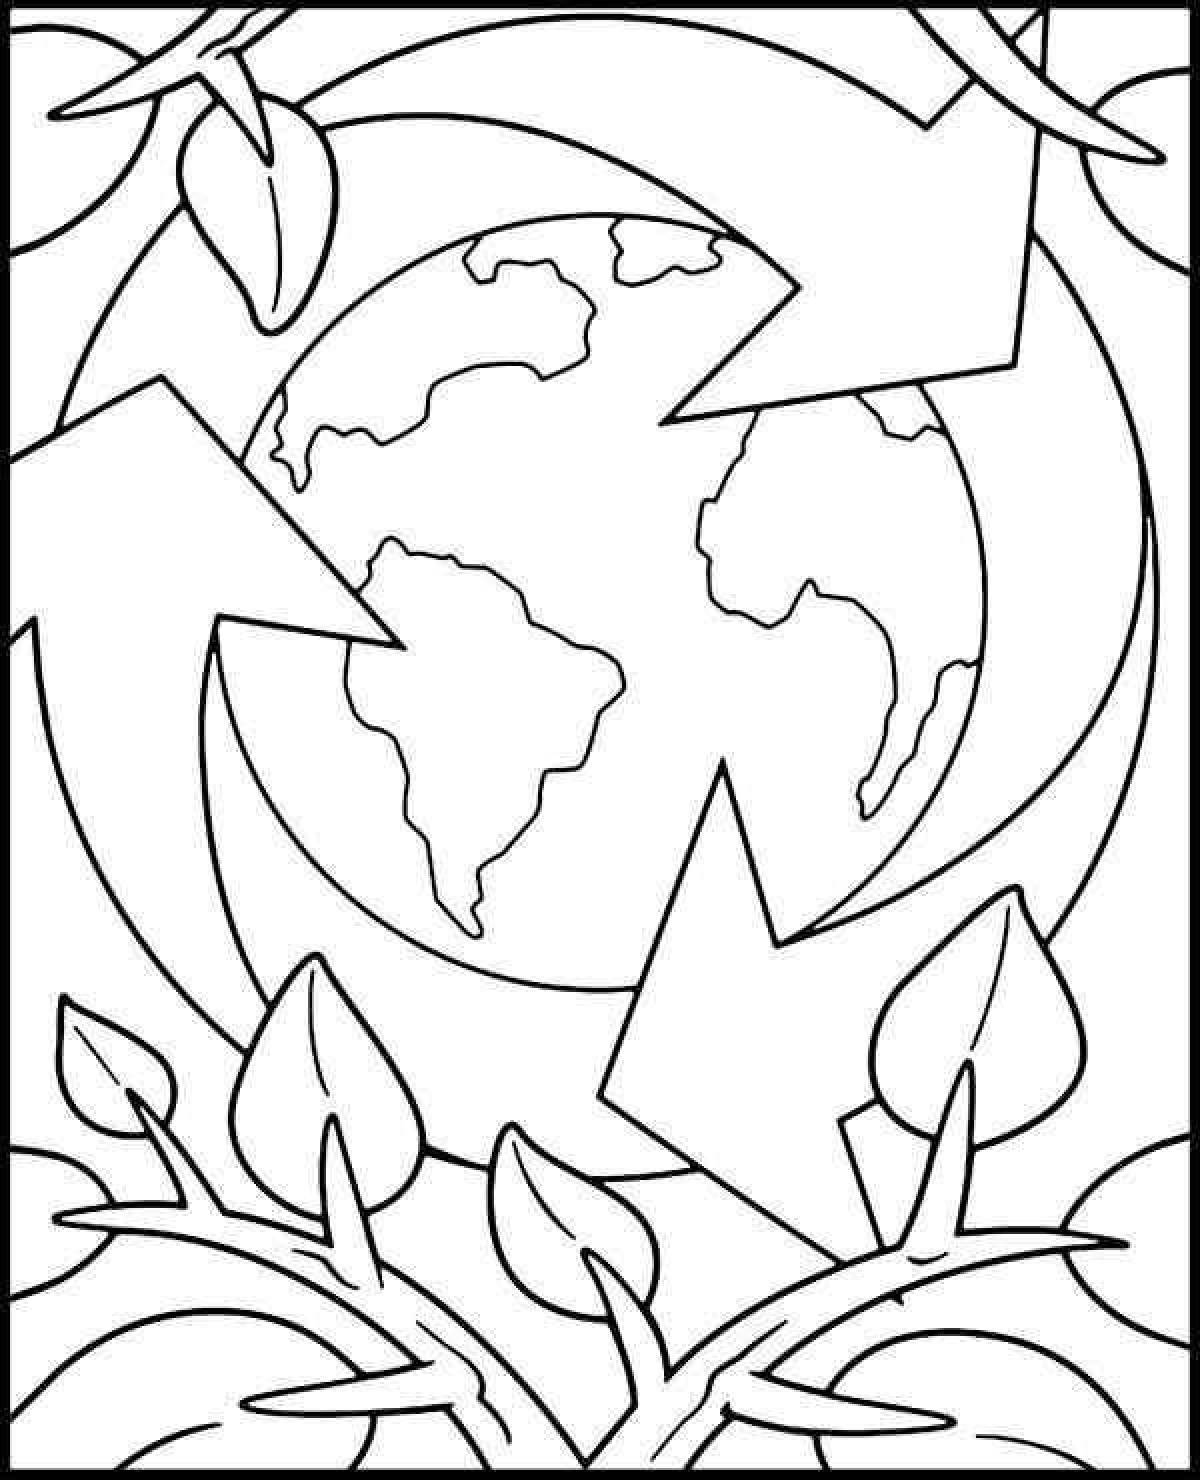 Colorful eco coloring book